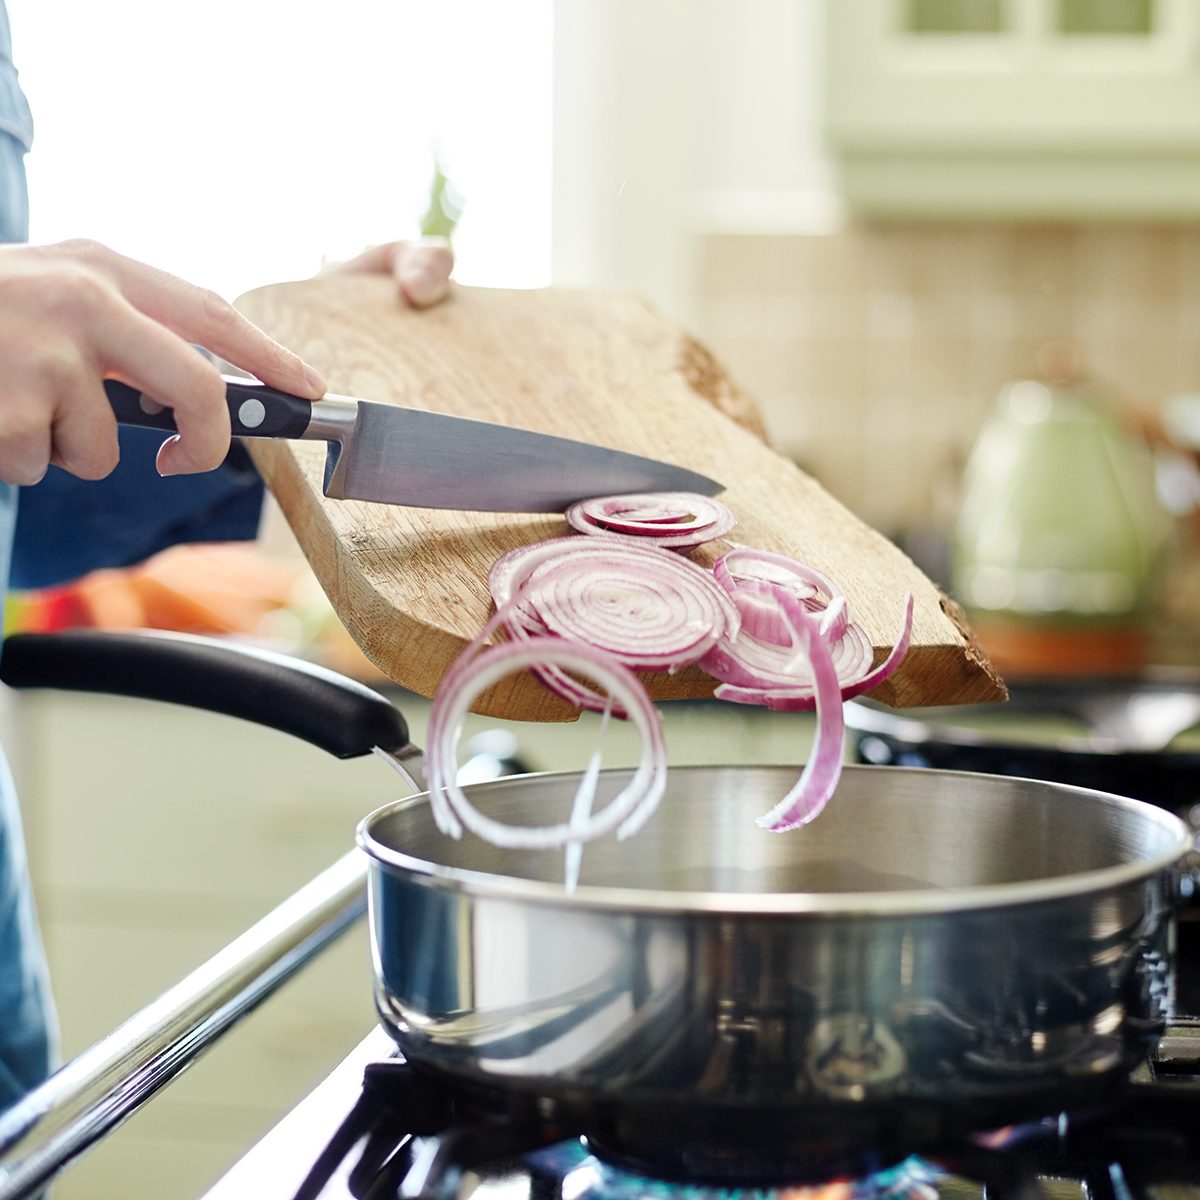 https://www.tasteofhome.com/wp-content/uploads/2019/04/woman-adding-chopped-onions-to-frying-pan-GettyImages-480132614.jpg?fit=680%2C680